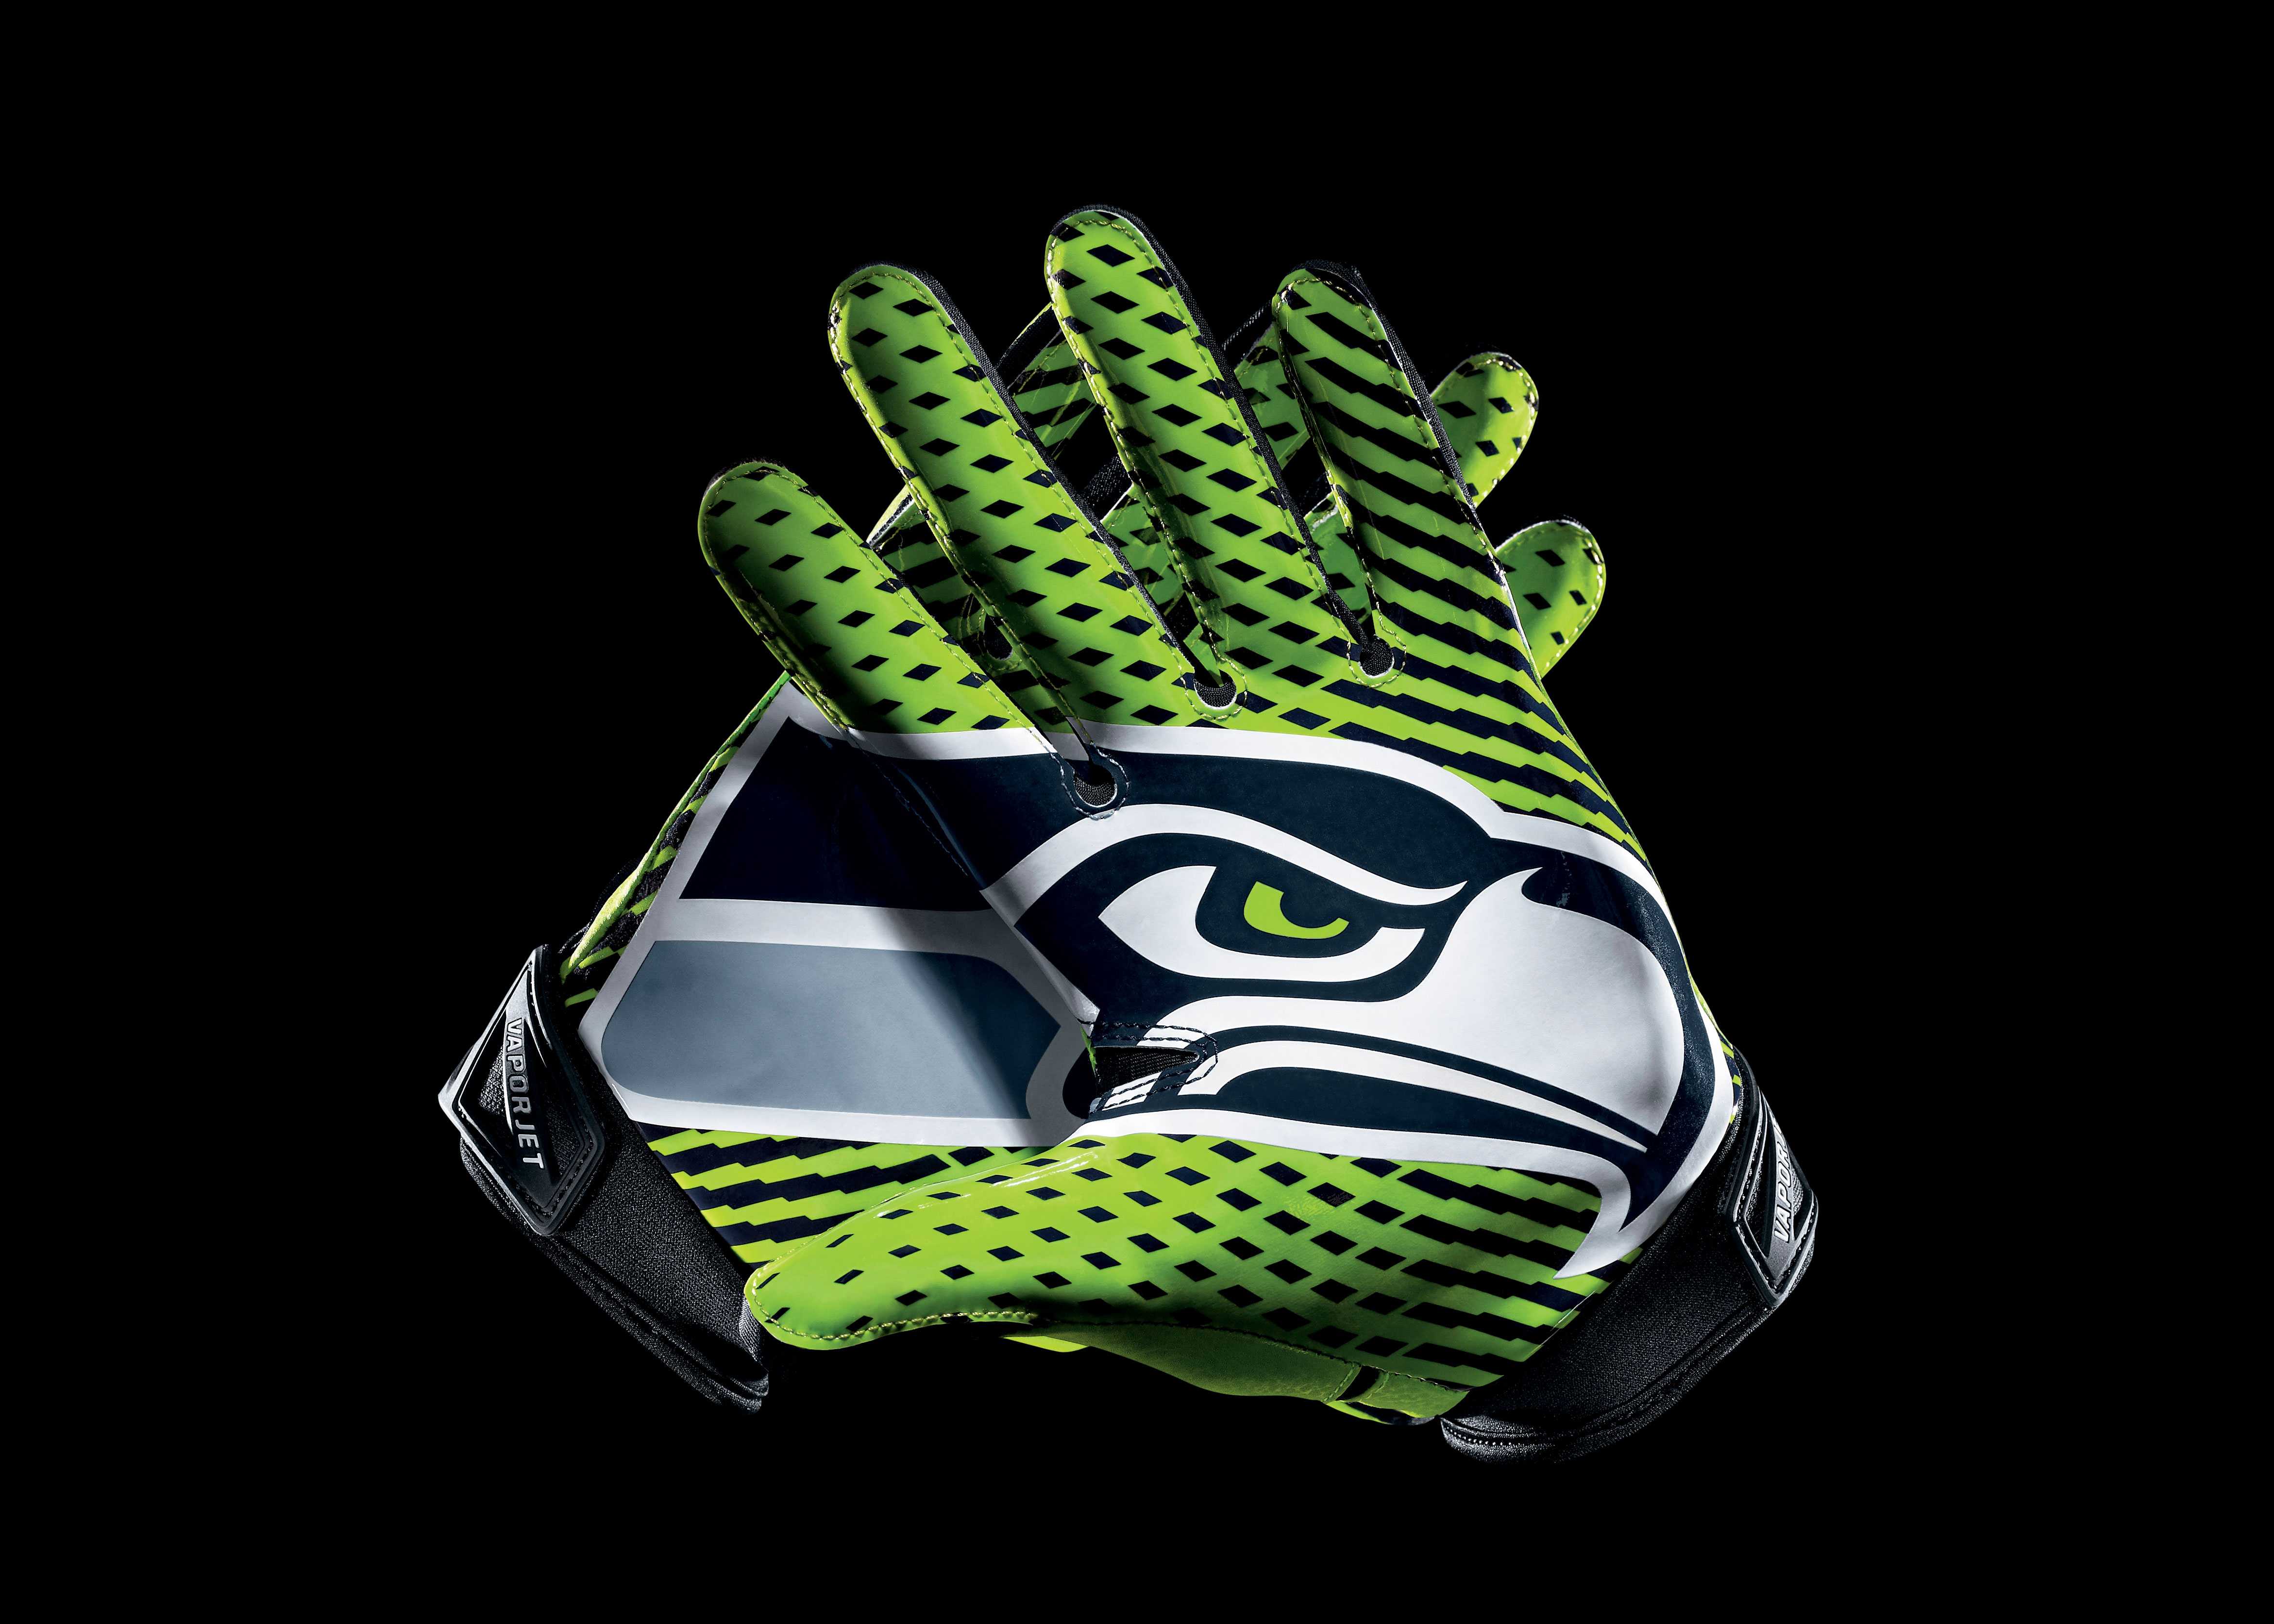 Seattle Seahawks Wallpaper With Gloves Px 2017 Image Wallvie Com